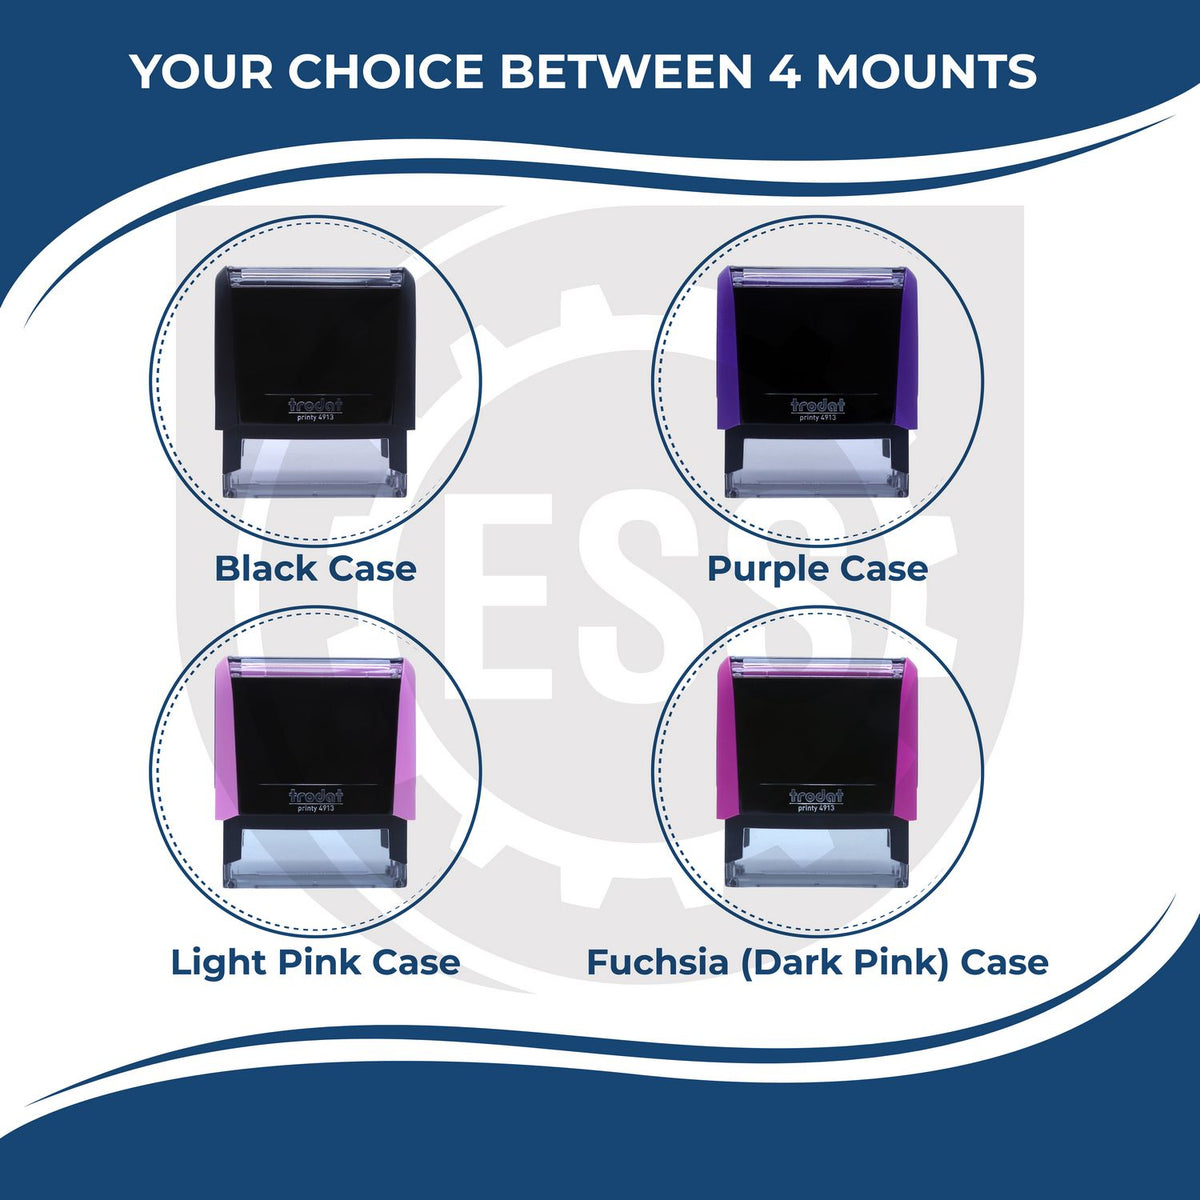 A picture of different colored mounts for the Self-Inking Rectangular Georgia Notary Stamp featurning a Red, Blue or Black Mount